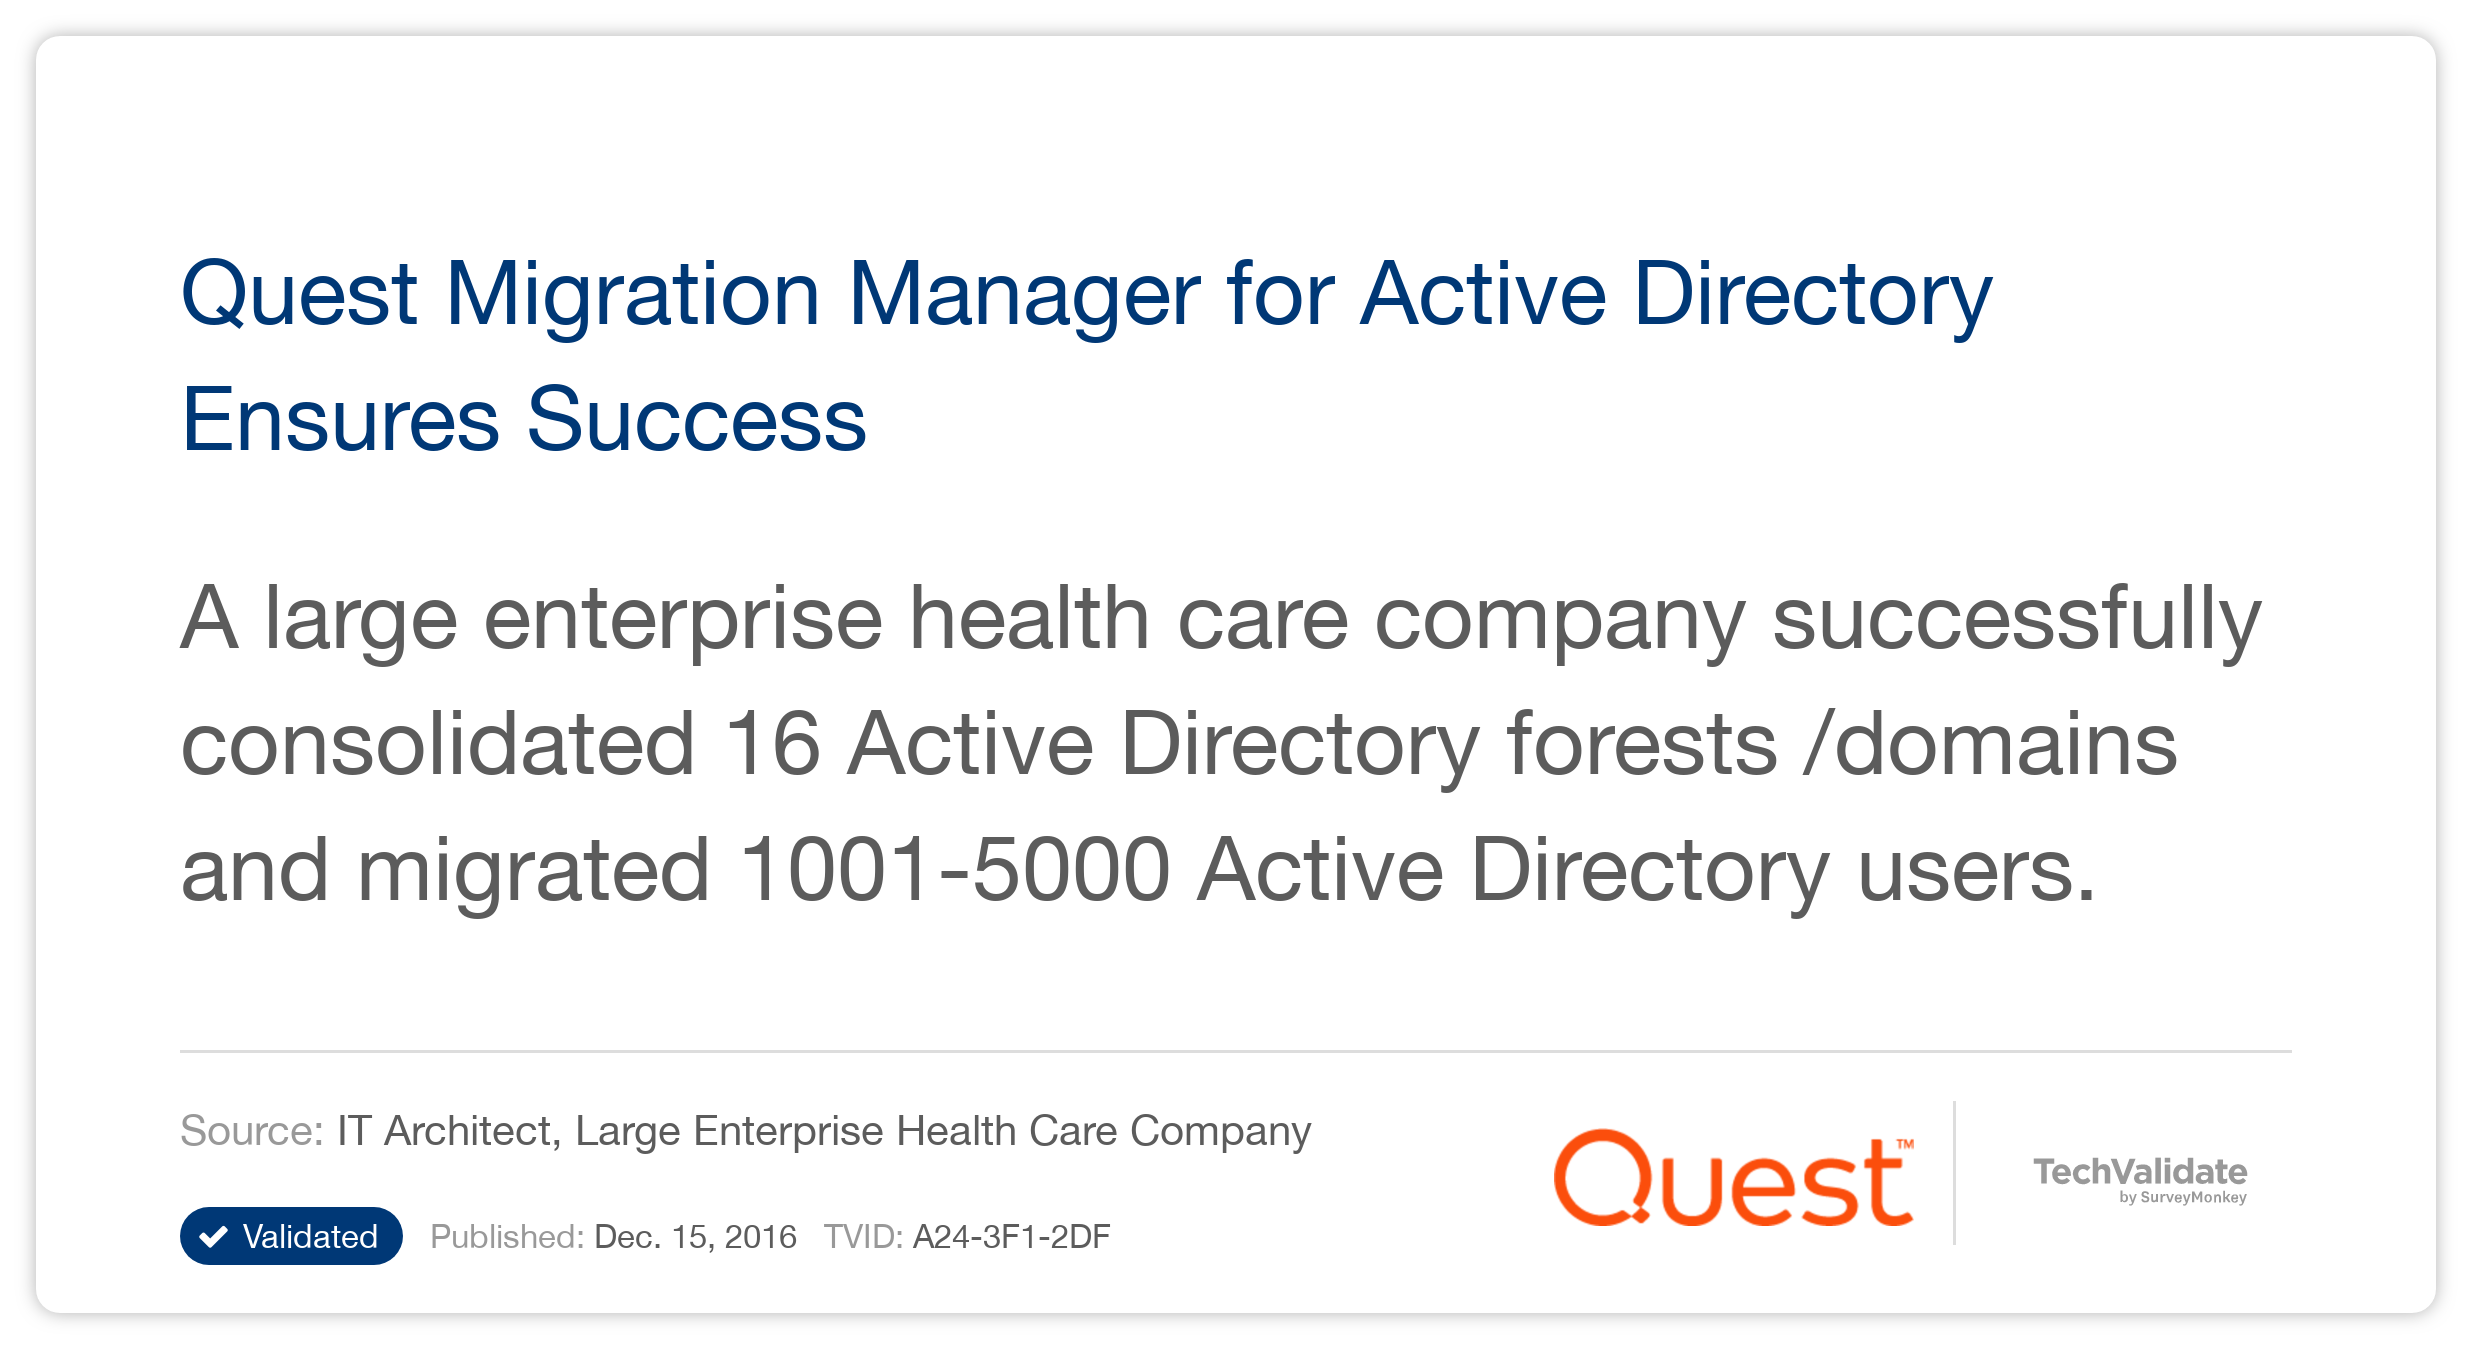 Quest Migration Manager for Active Directory Ensures Success